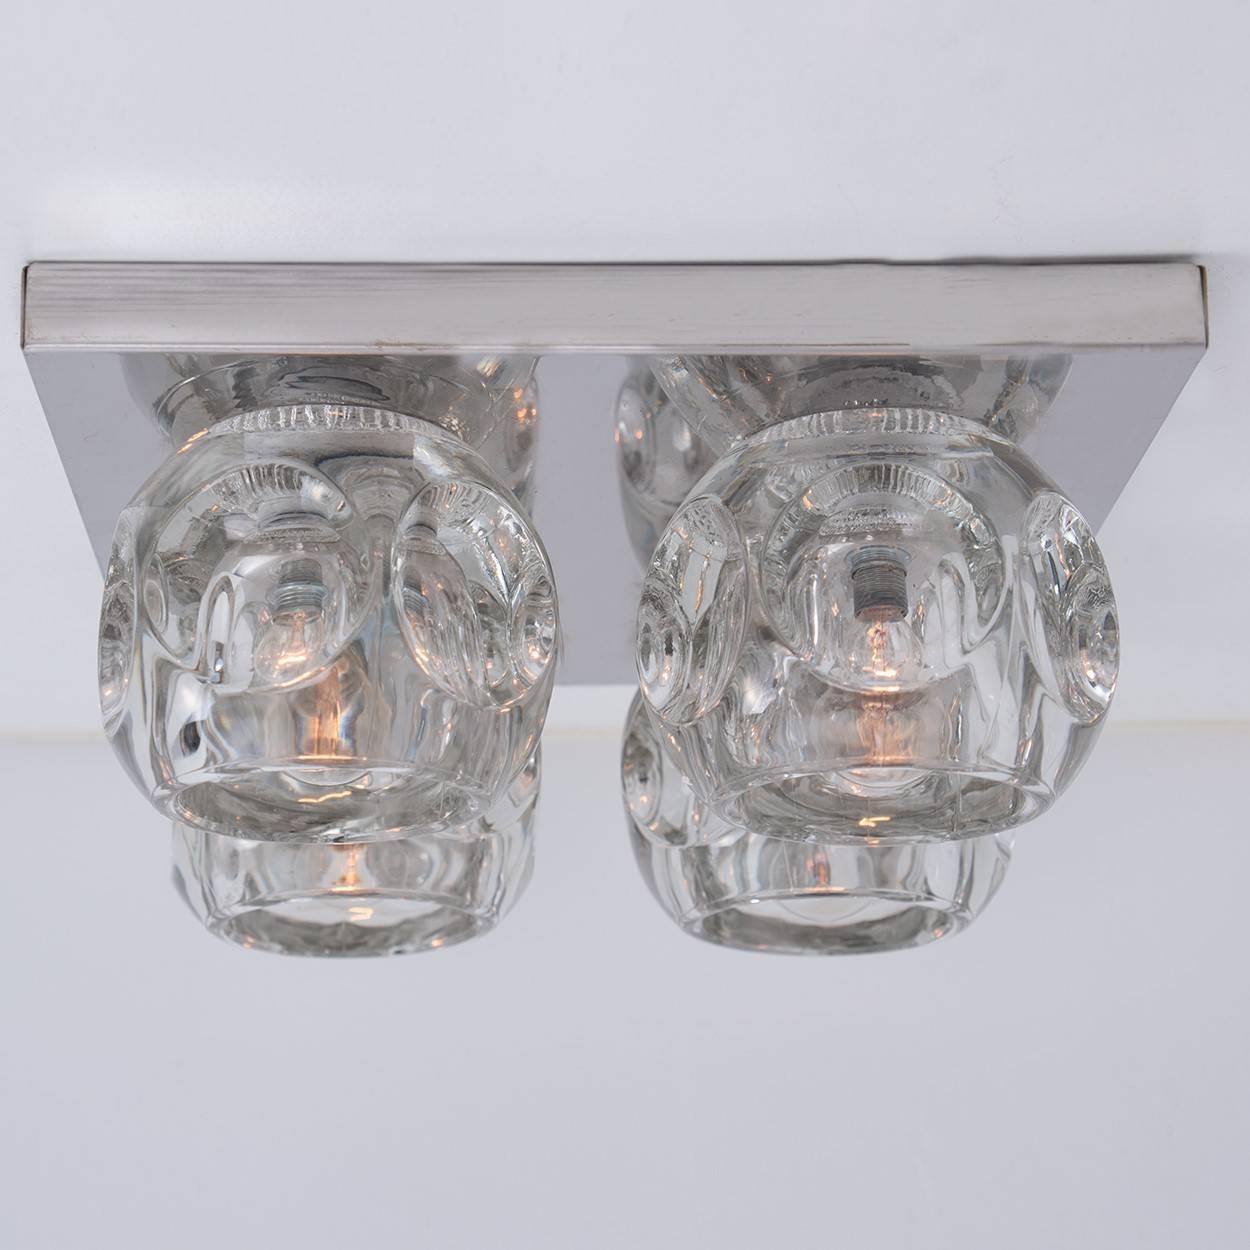 German Peill & Putzler Light Fixtures Faceted Glass on Chrome, 1970s For Sale